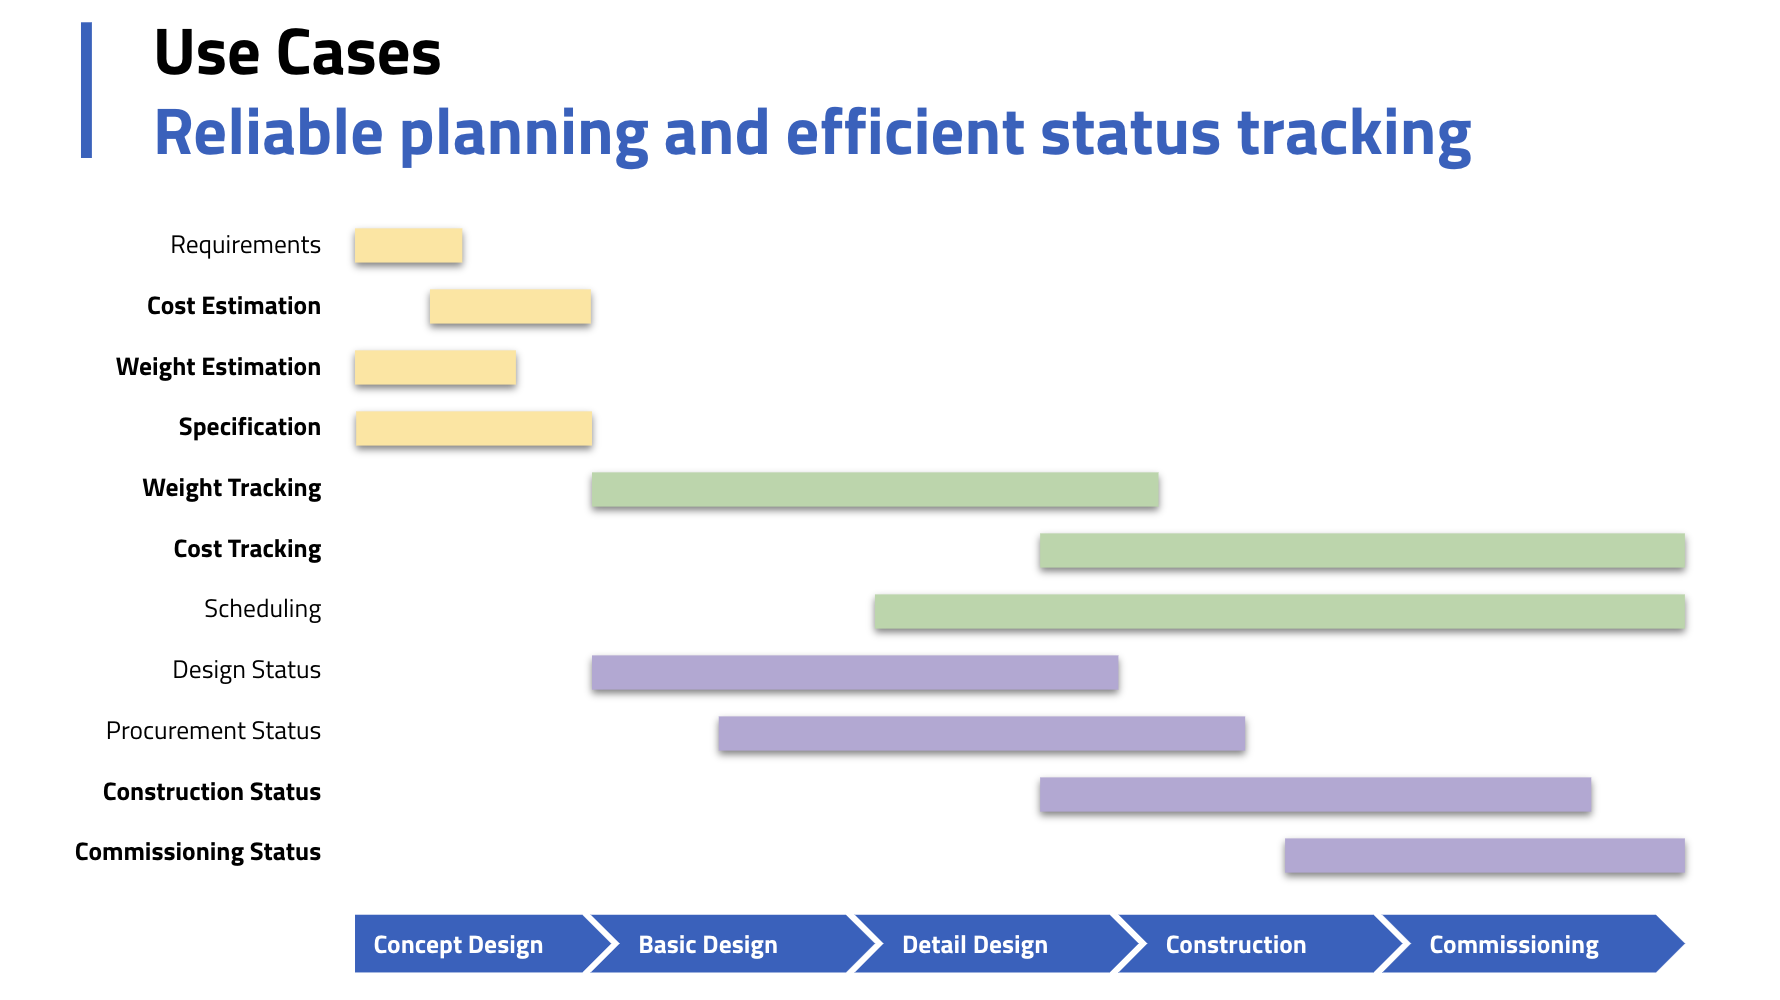 Reliable planning and efficient status tracking - Naval Architect Use Cases